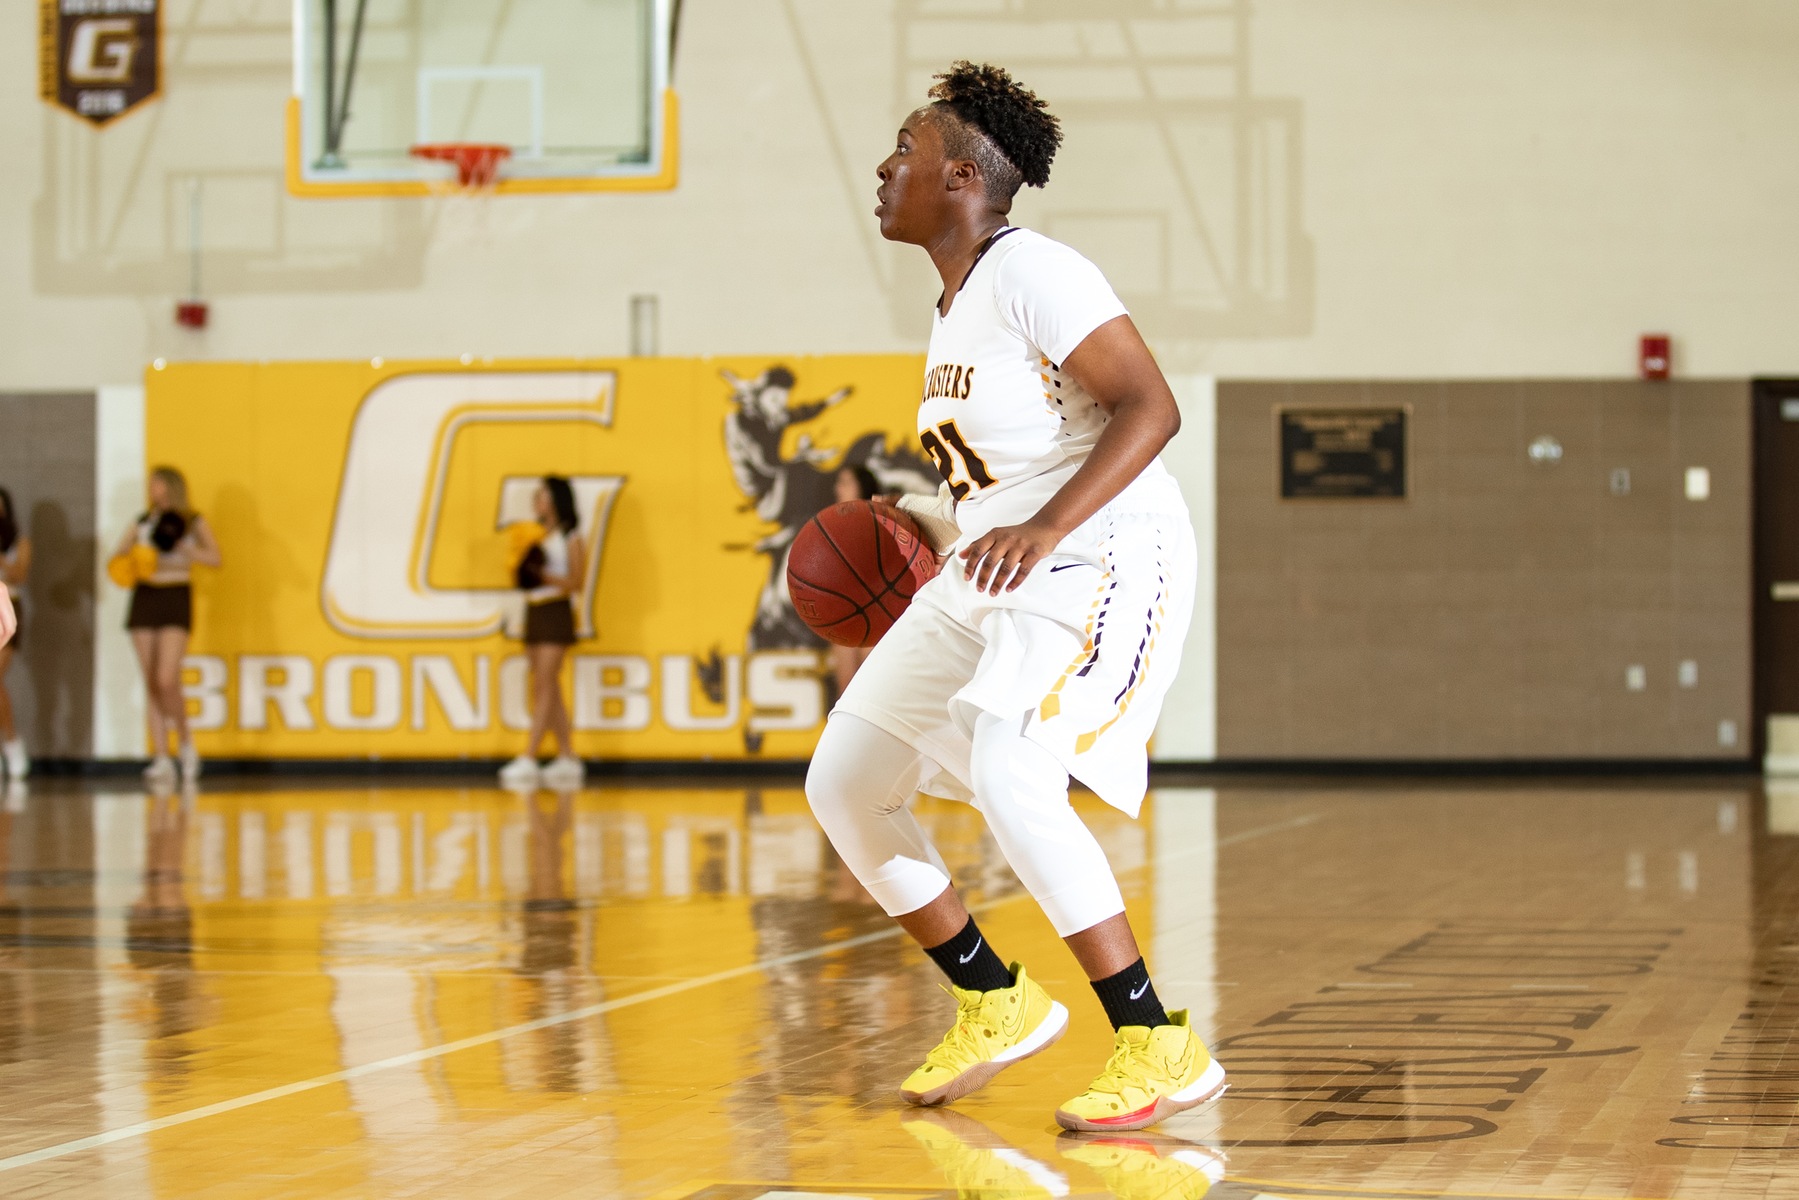 Tough shooting night for Broncbusters as they fall to Otero